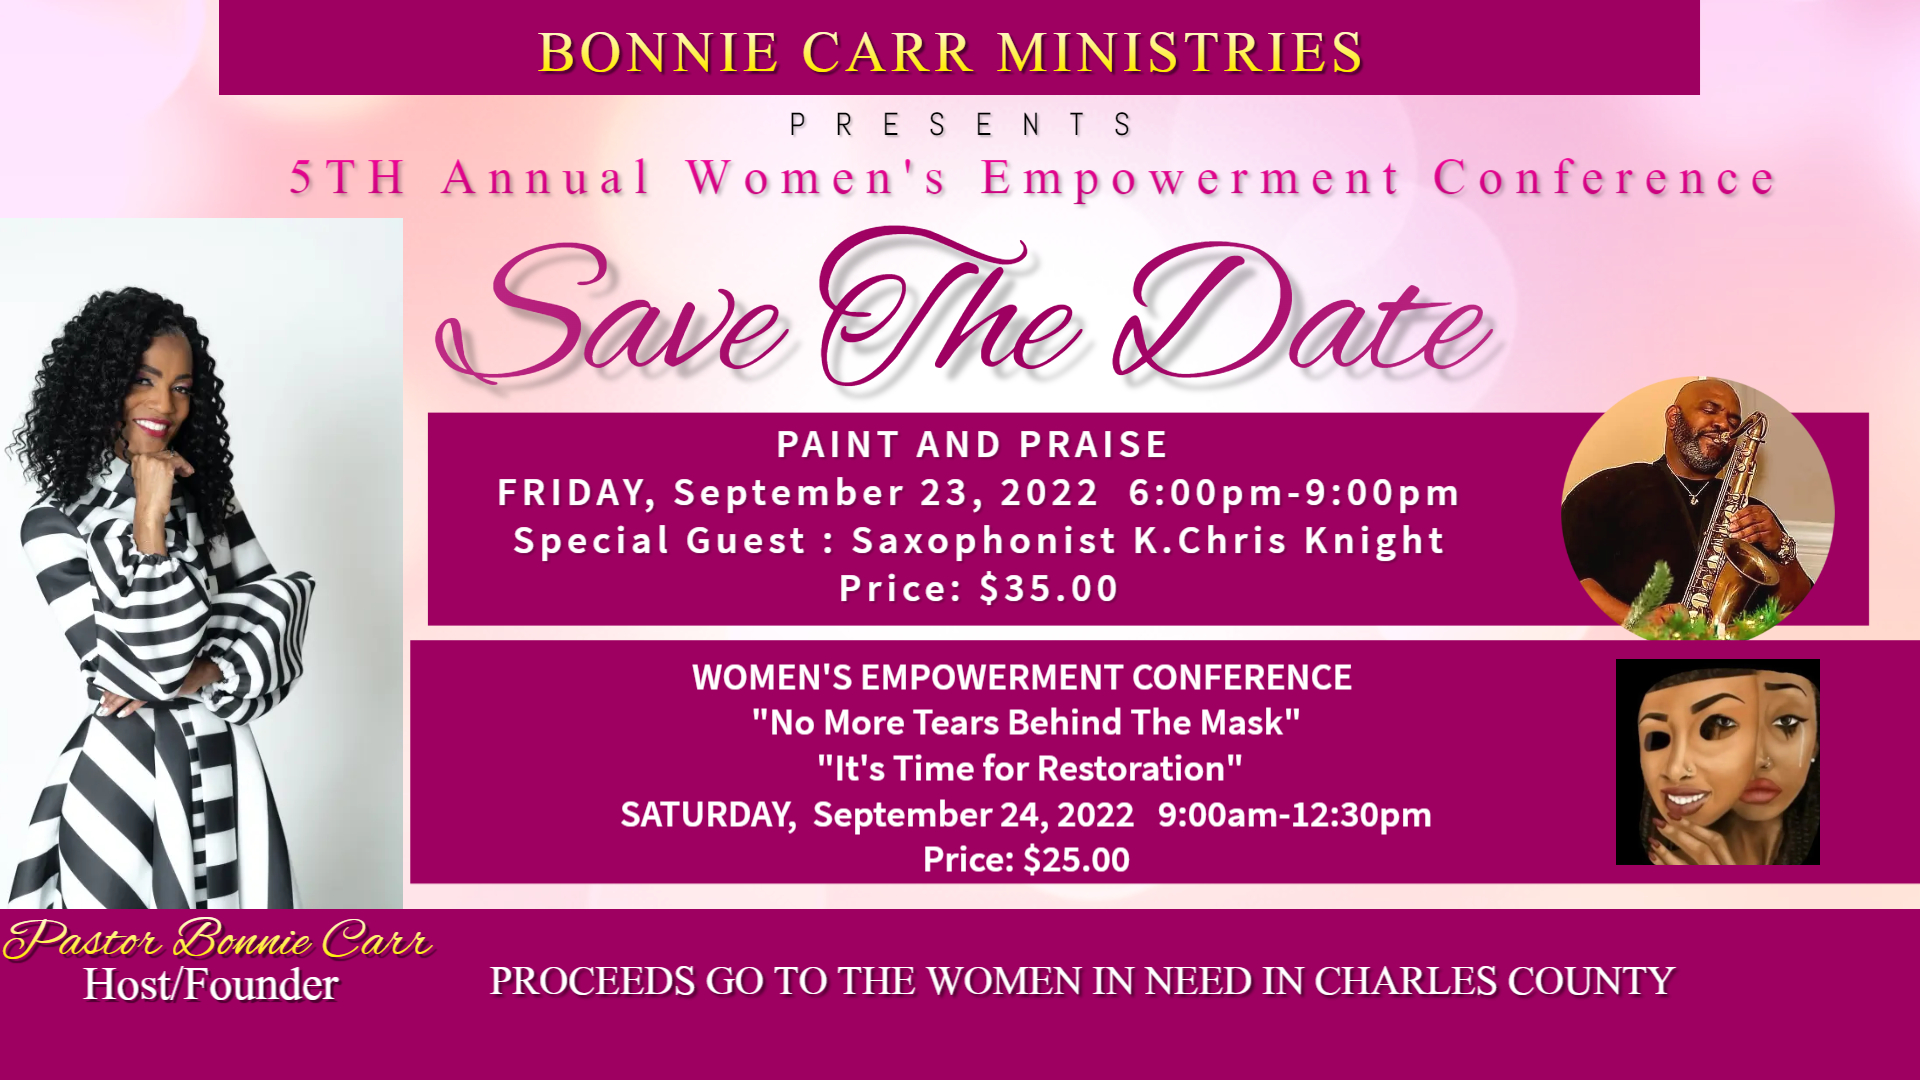 Womens Empowerment Conference Save the Date 2022.jpg